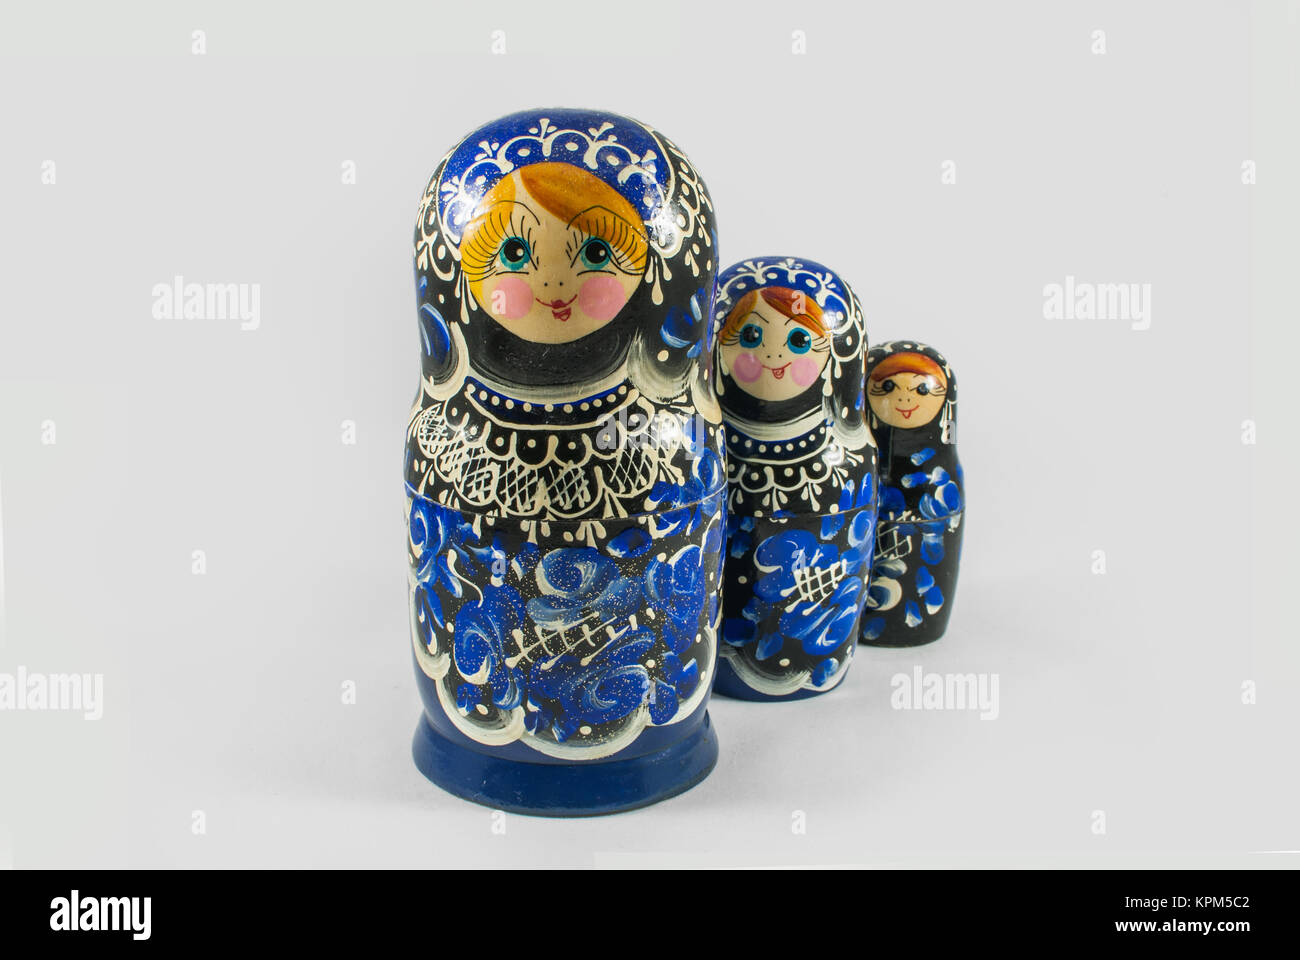 russian painted dolls